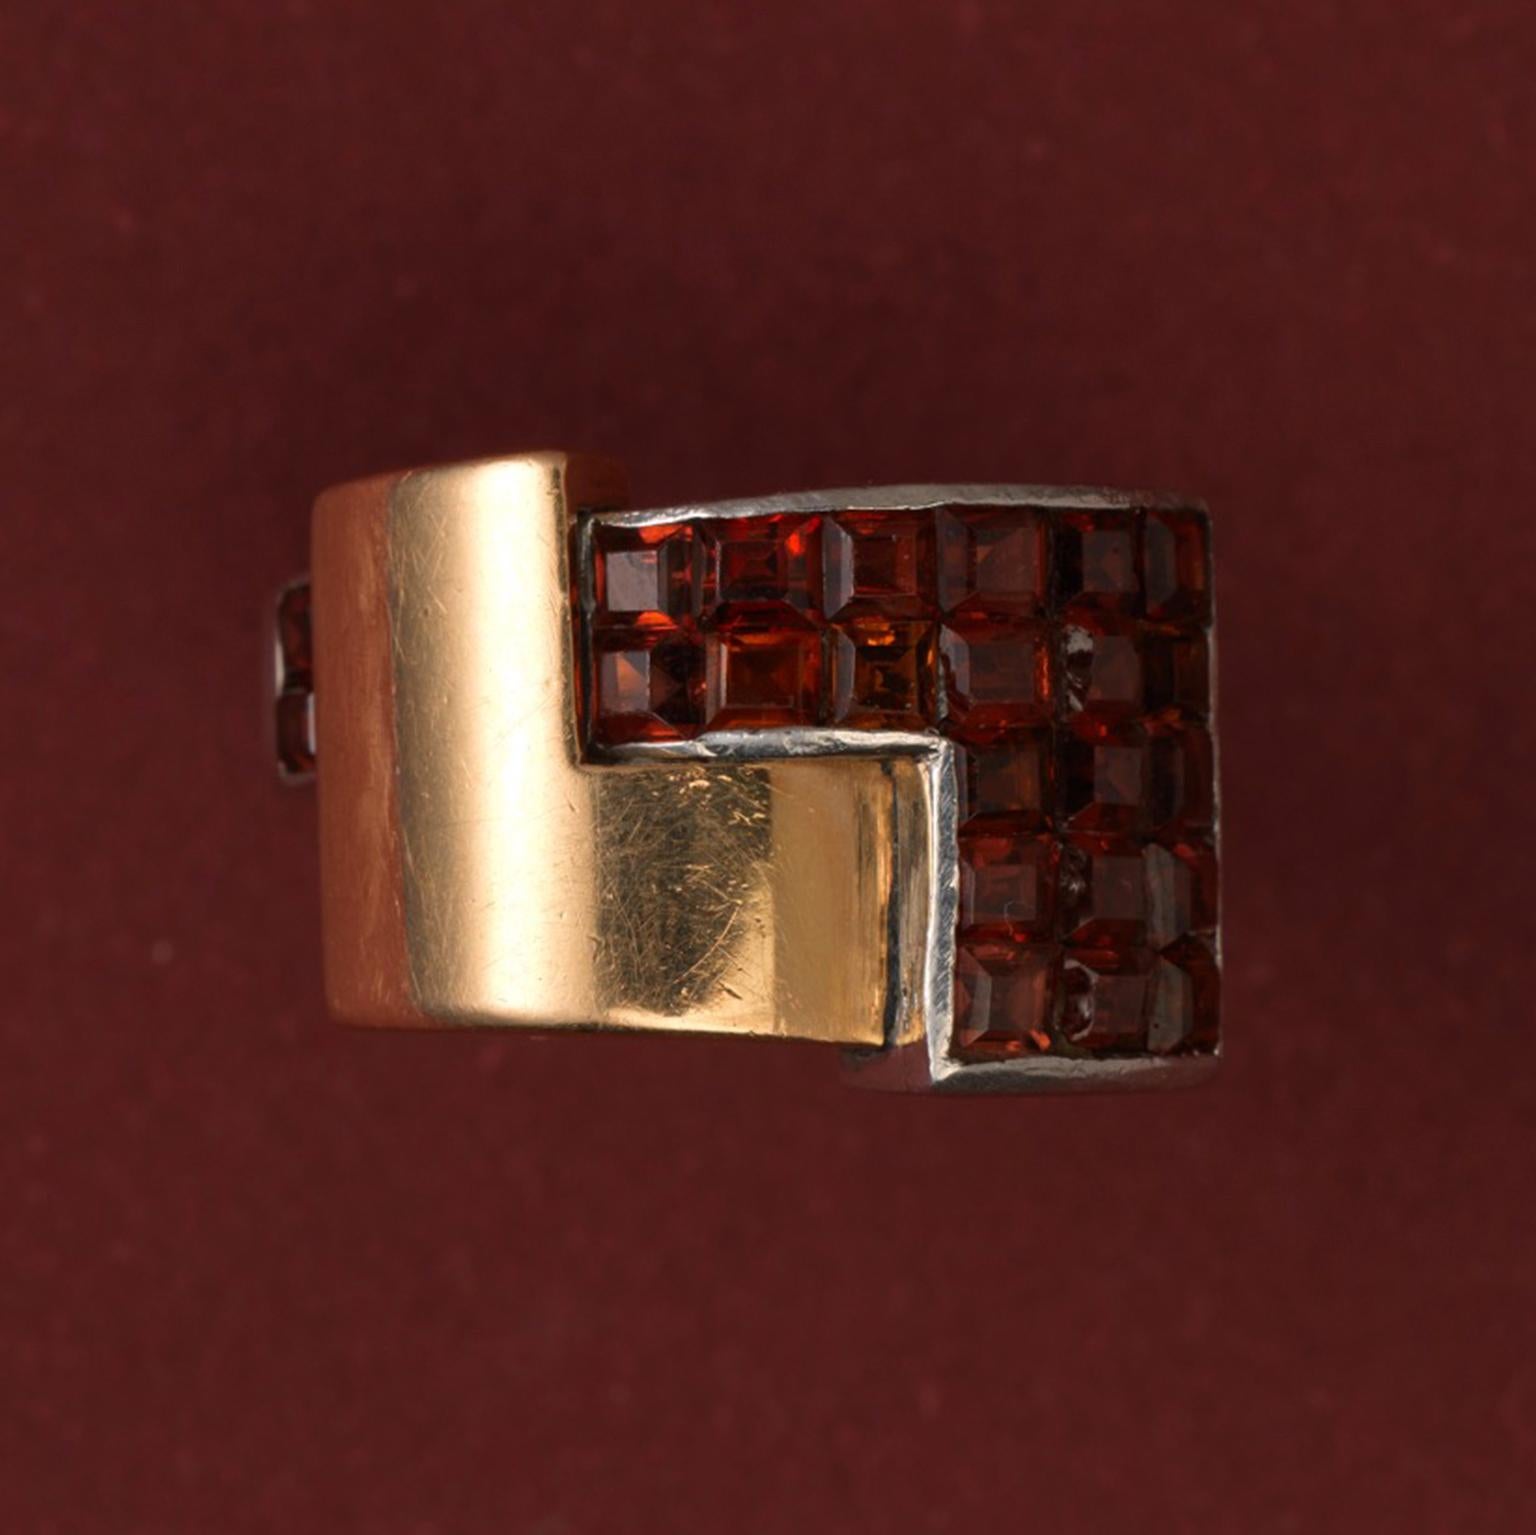 A rare Art Deco 18 carat gold and platinum ring in a geometrical construct of two juxtaposed angled elements, one in 18 carat gold and the other in platinum with 21 square-cut invisibly set hessonite garnets (app. 3.6 carats); master mark and